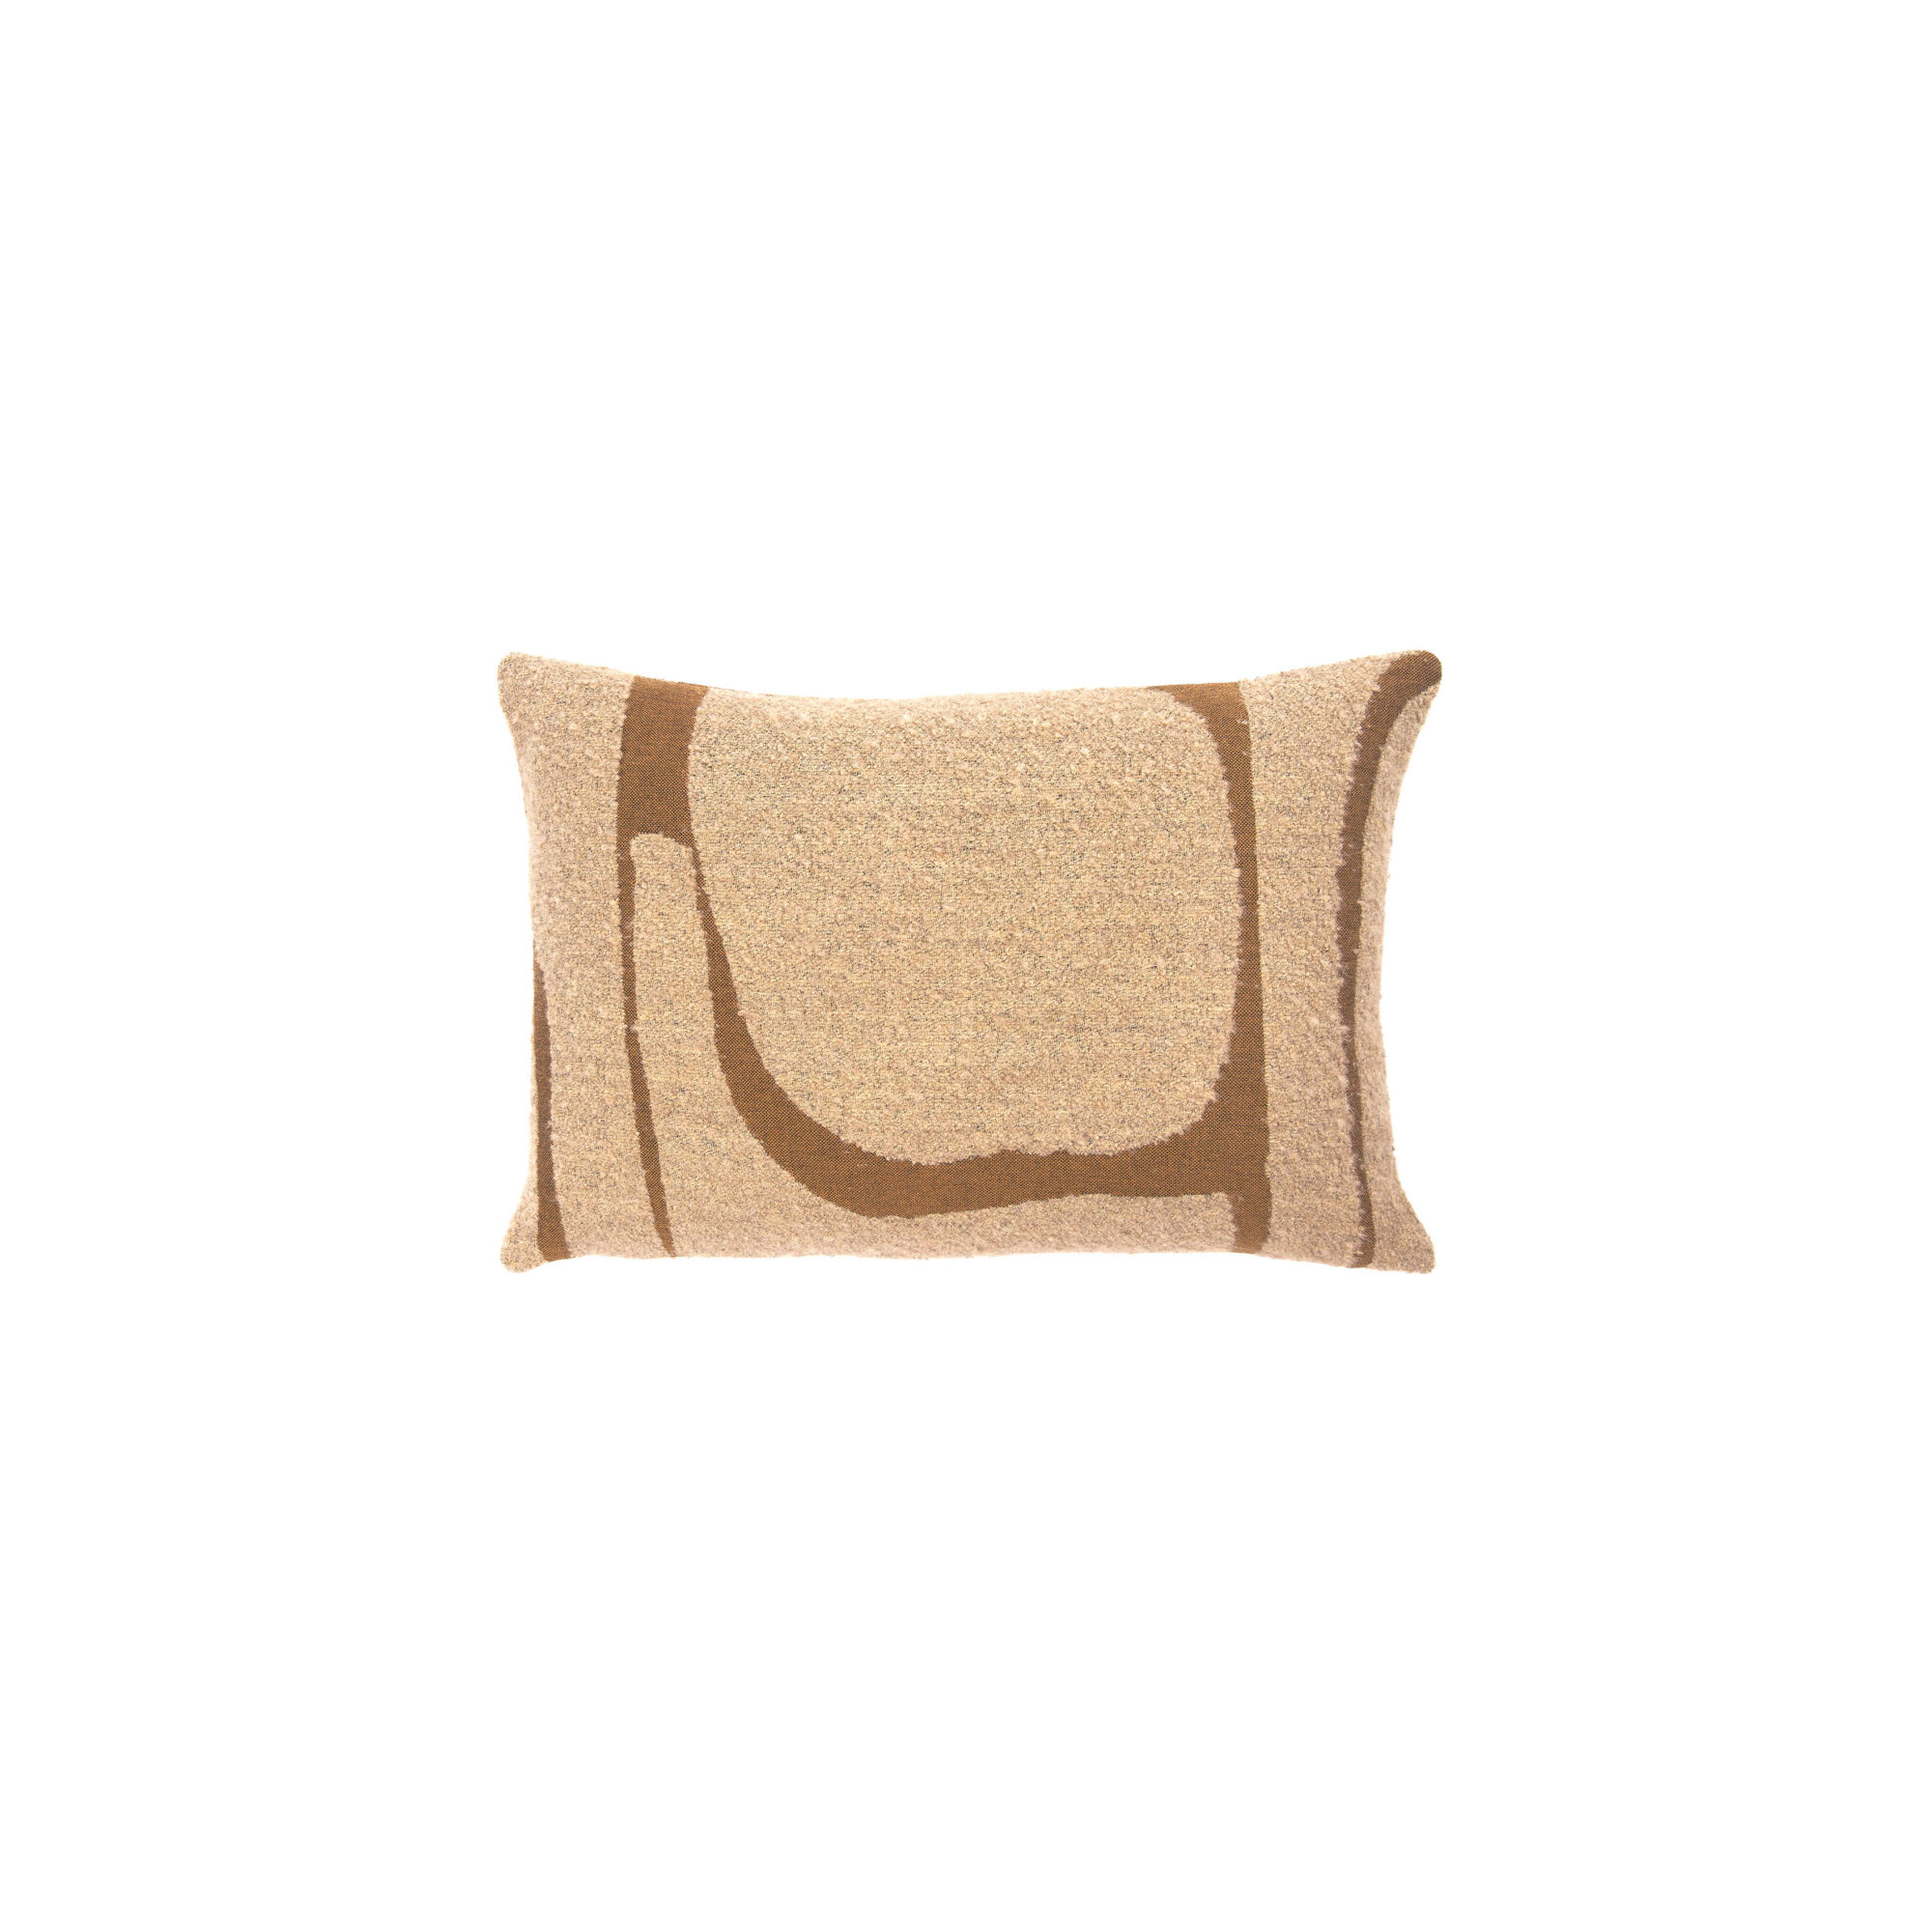 brown and tan swirled pillow inspired by this Frank Lloyd Wright home